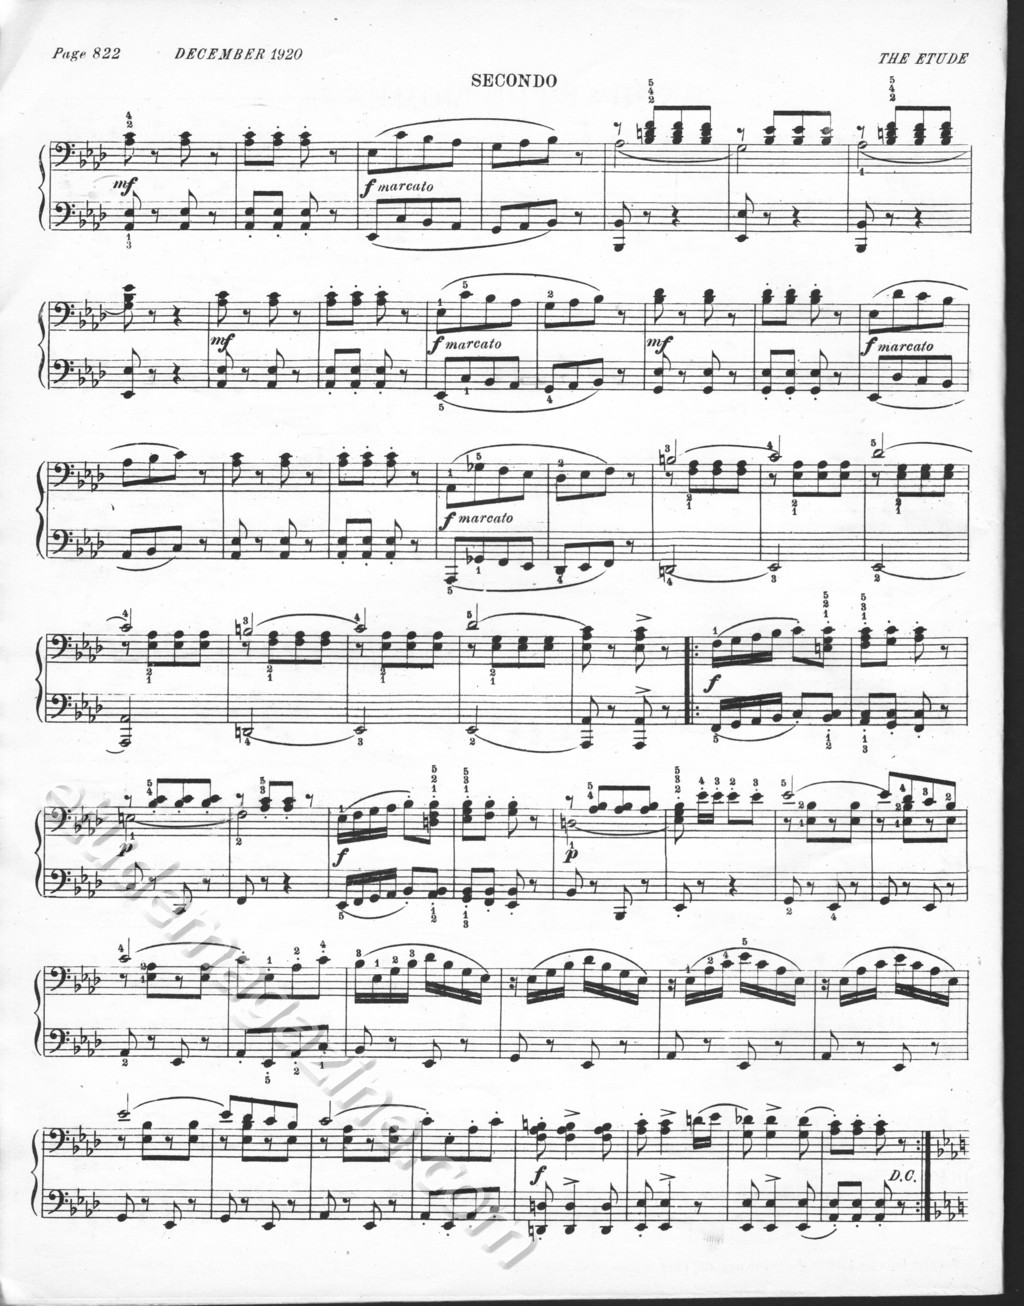 Enchanted Moments (Polka Caprice), for piano 4-hands. Adam Geibel.